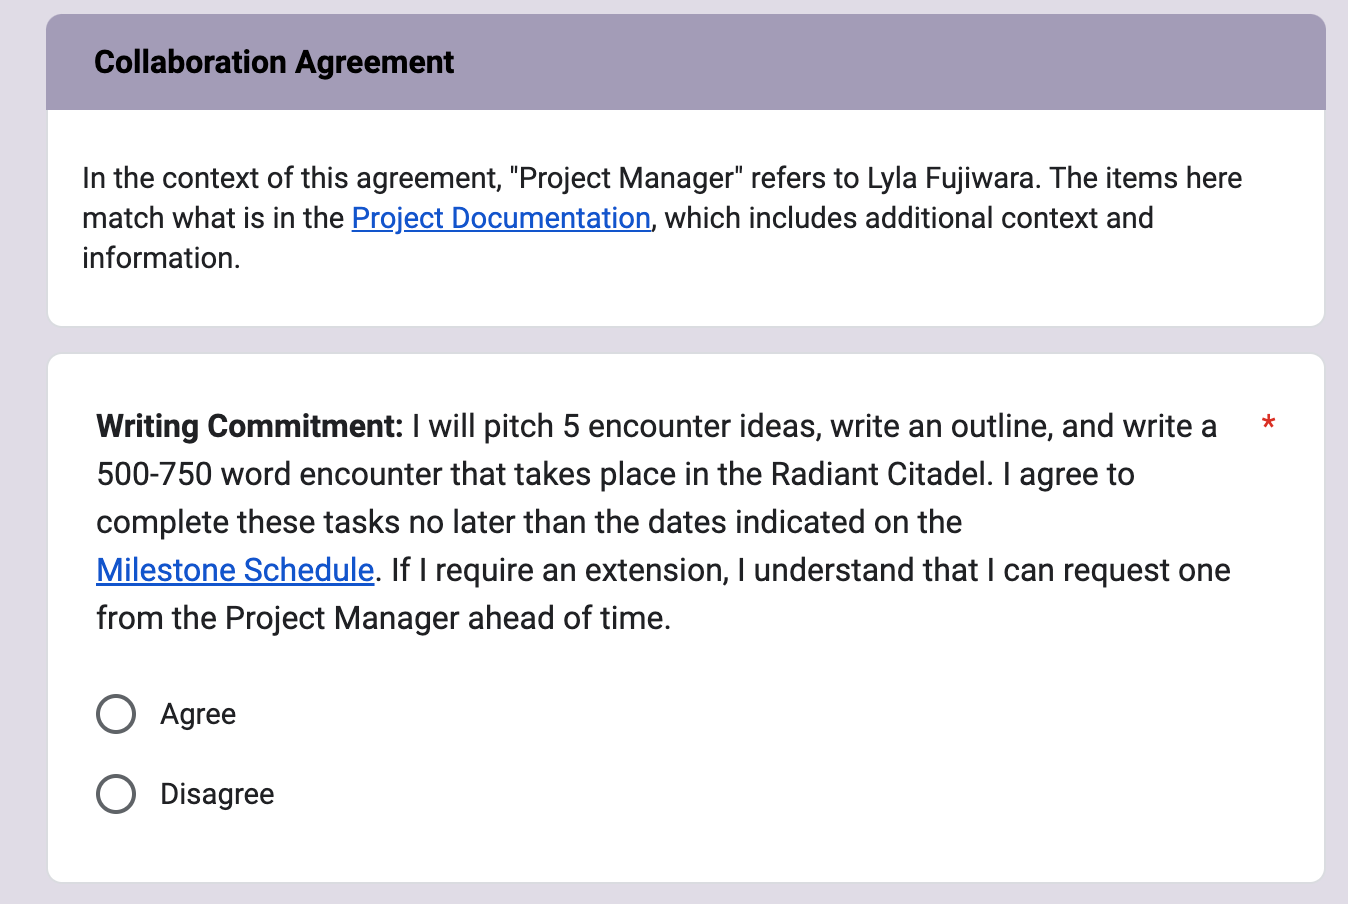 Image of a Google Form. The first section says “In the context of this agreement, "Project Manager" refers to Lyla Fujiwara. The items here match what is in the Project Documentation, which includes additional context and information.” The next section has the question above, with the options Agree and Disagree.